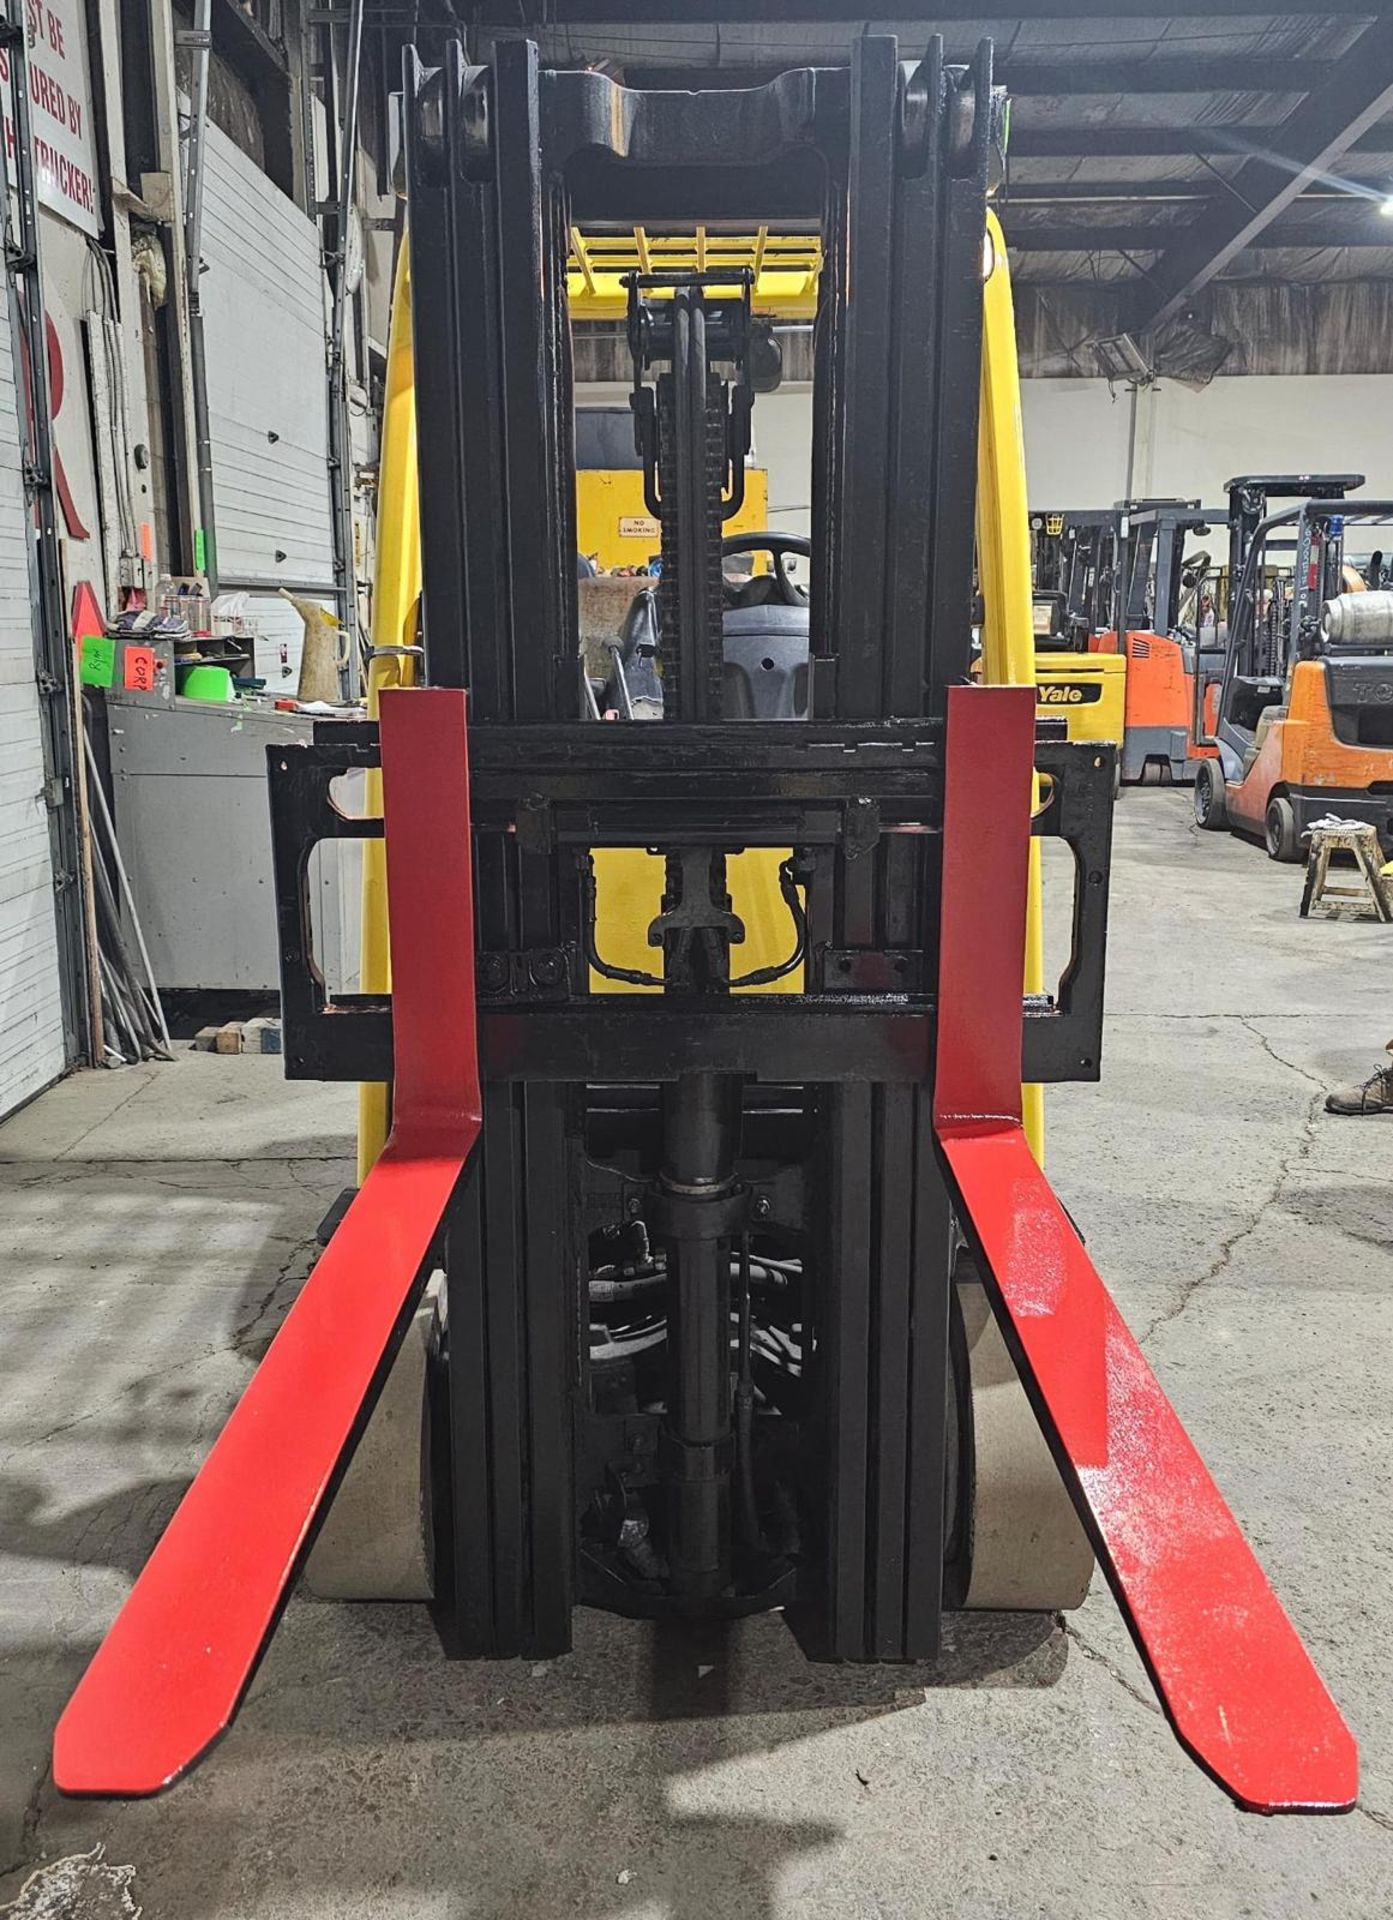 2015 Hyster 5,000lbs Capacity LPG (Propane) Forklift with sideshift & 3-STAGE MAST & Non marking - Image 4 of 4